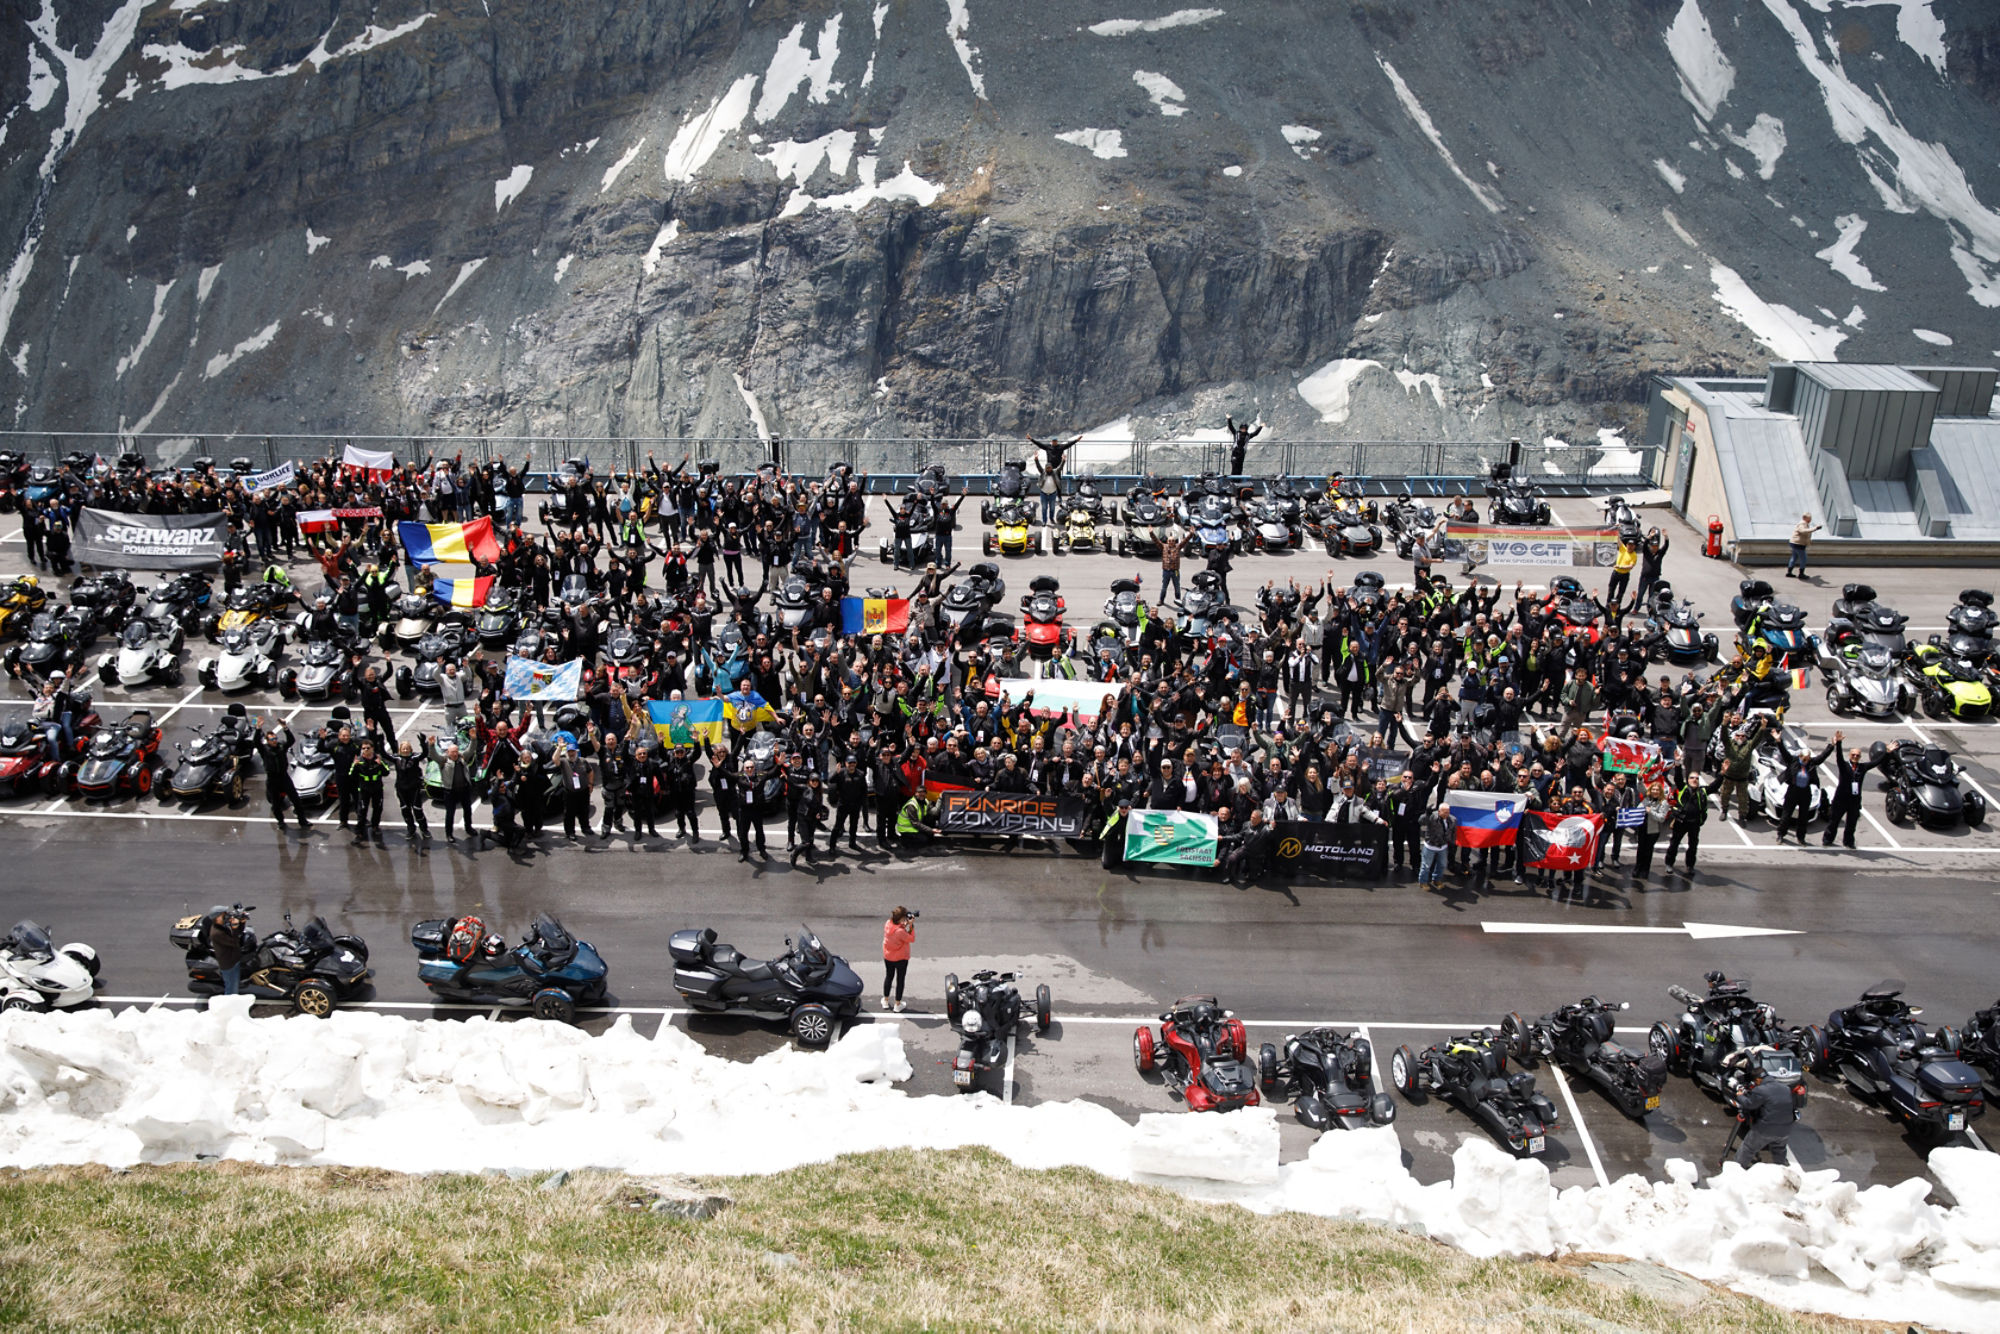 Group picture at the Can-Am Grossglockner Challenge 2023